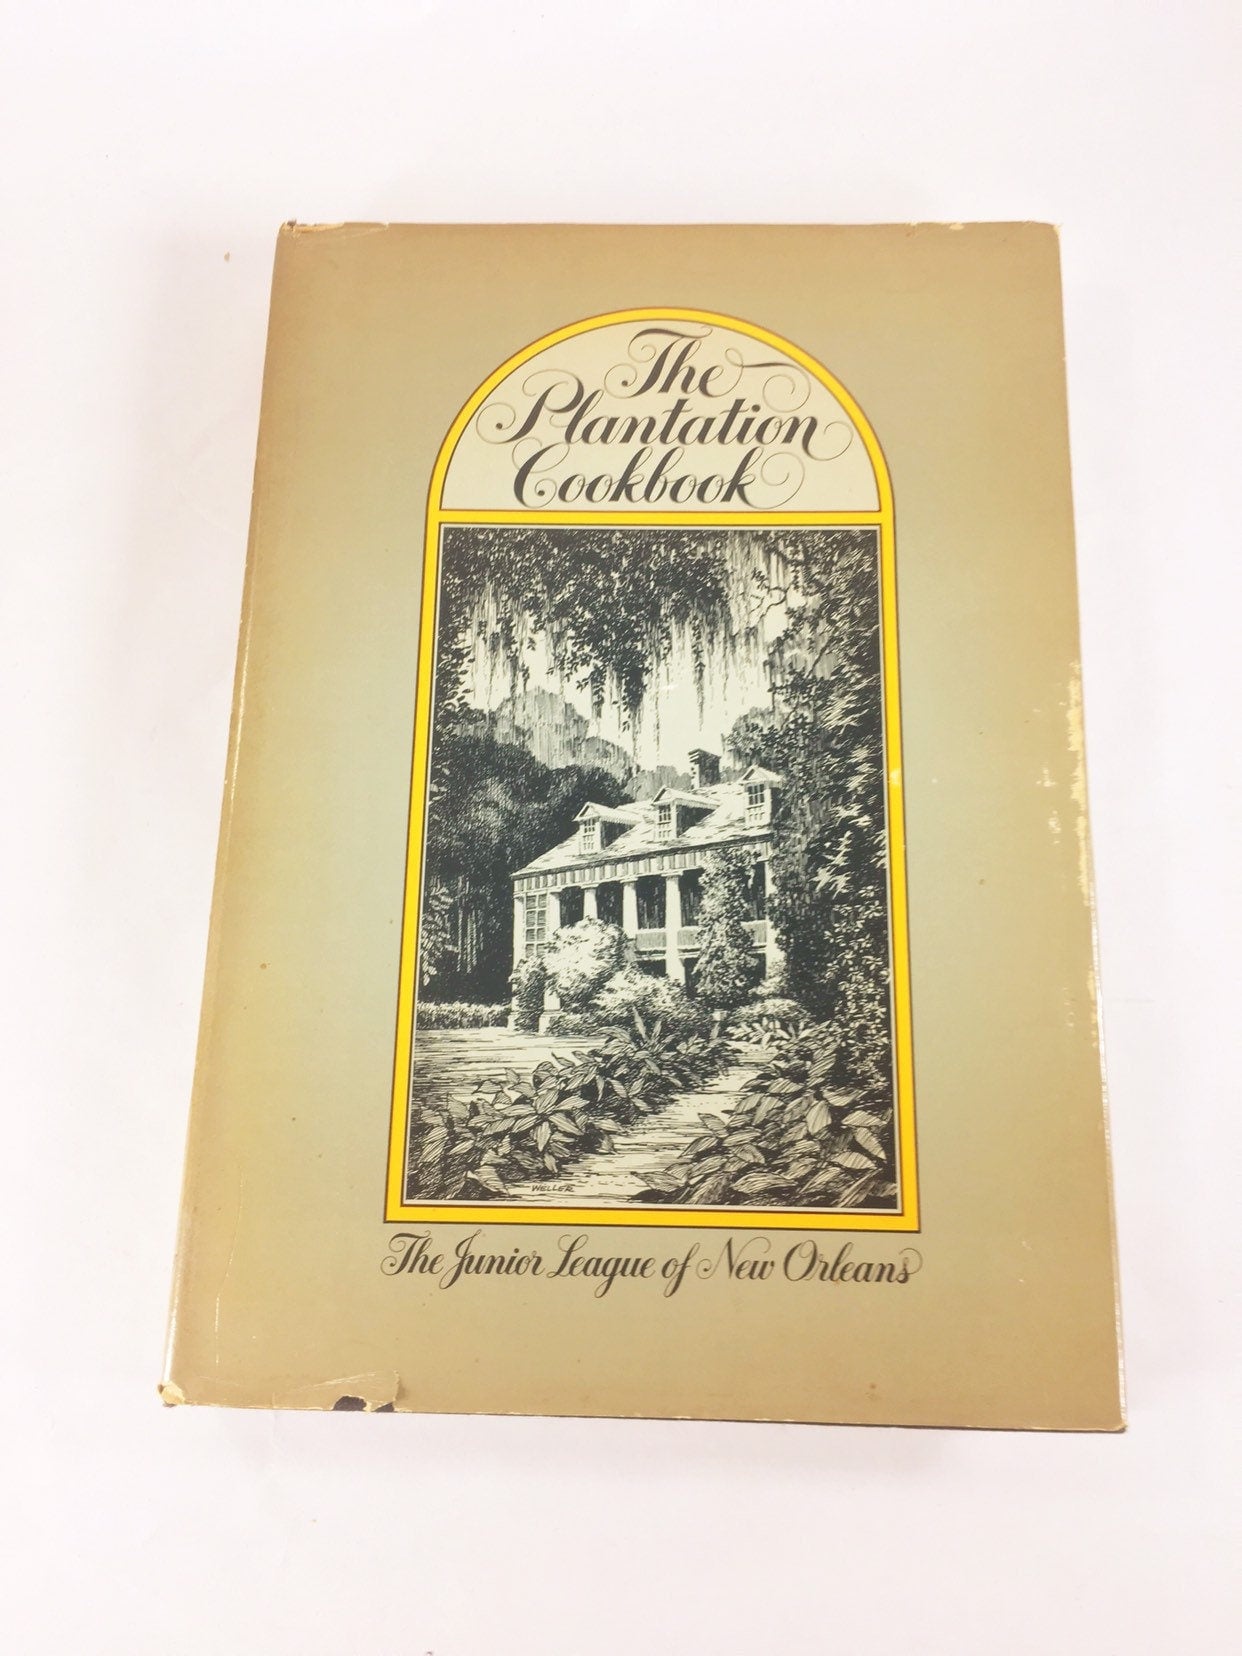 The Plantation Cookbook by the New Orleans Junior League. Vintage Cookbook circa 1972. First Edition. Turtle Soup, Grillades, Shrimp Creole